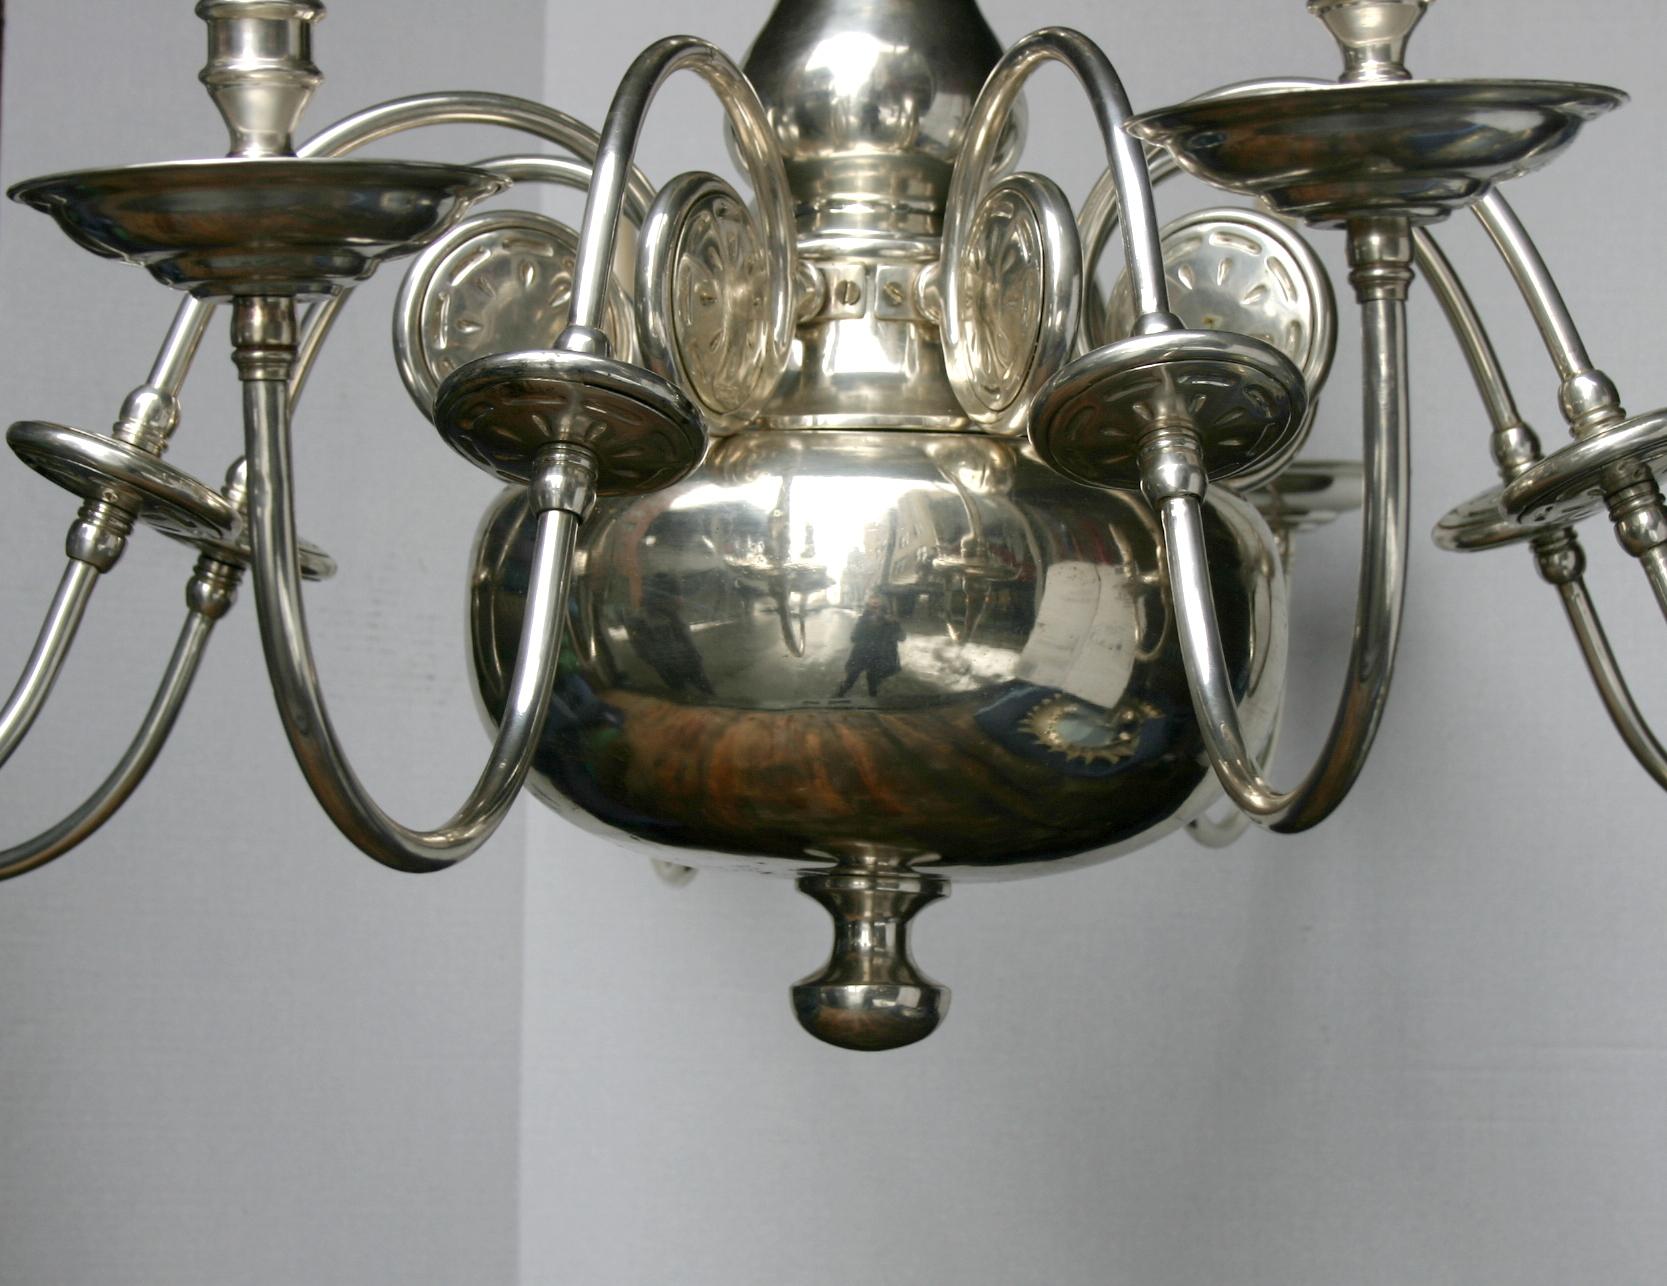 A pair of circa 1930's silver-plated eight-arm Dutch chandeliers with large central body, scrolling arms and oversized cups. Sold individually.

Measurements:
Diameter: 46.5